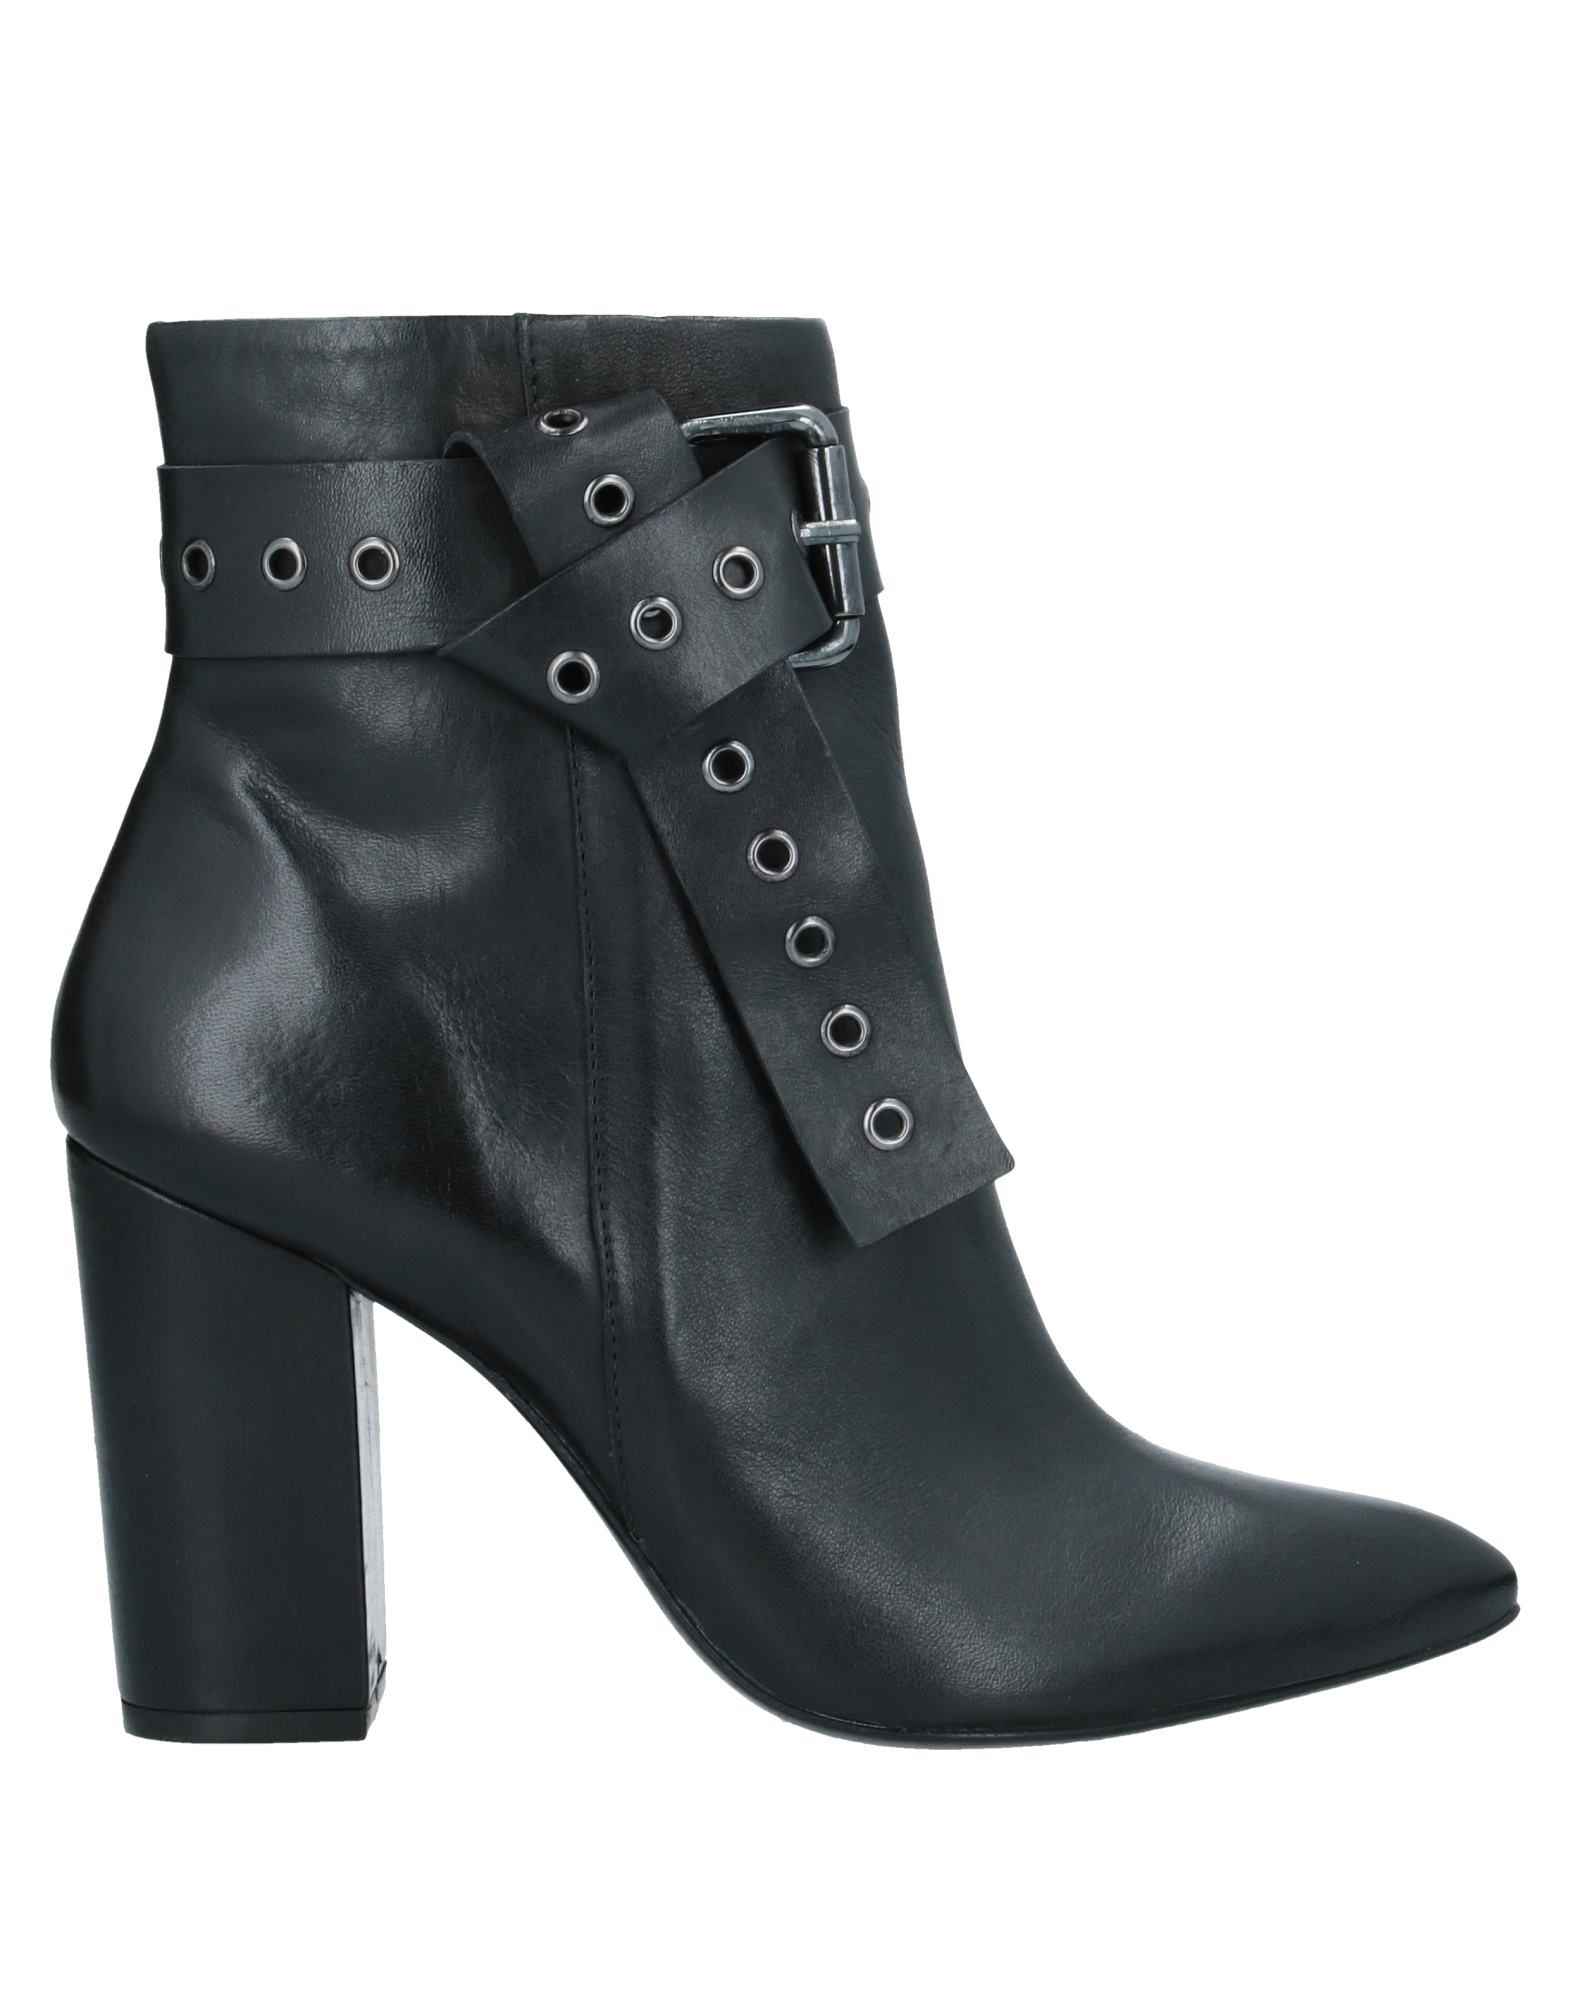 VICENZA) Ankle boots - Item 11921843